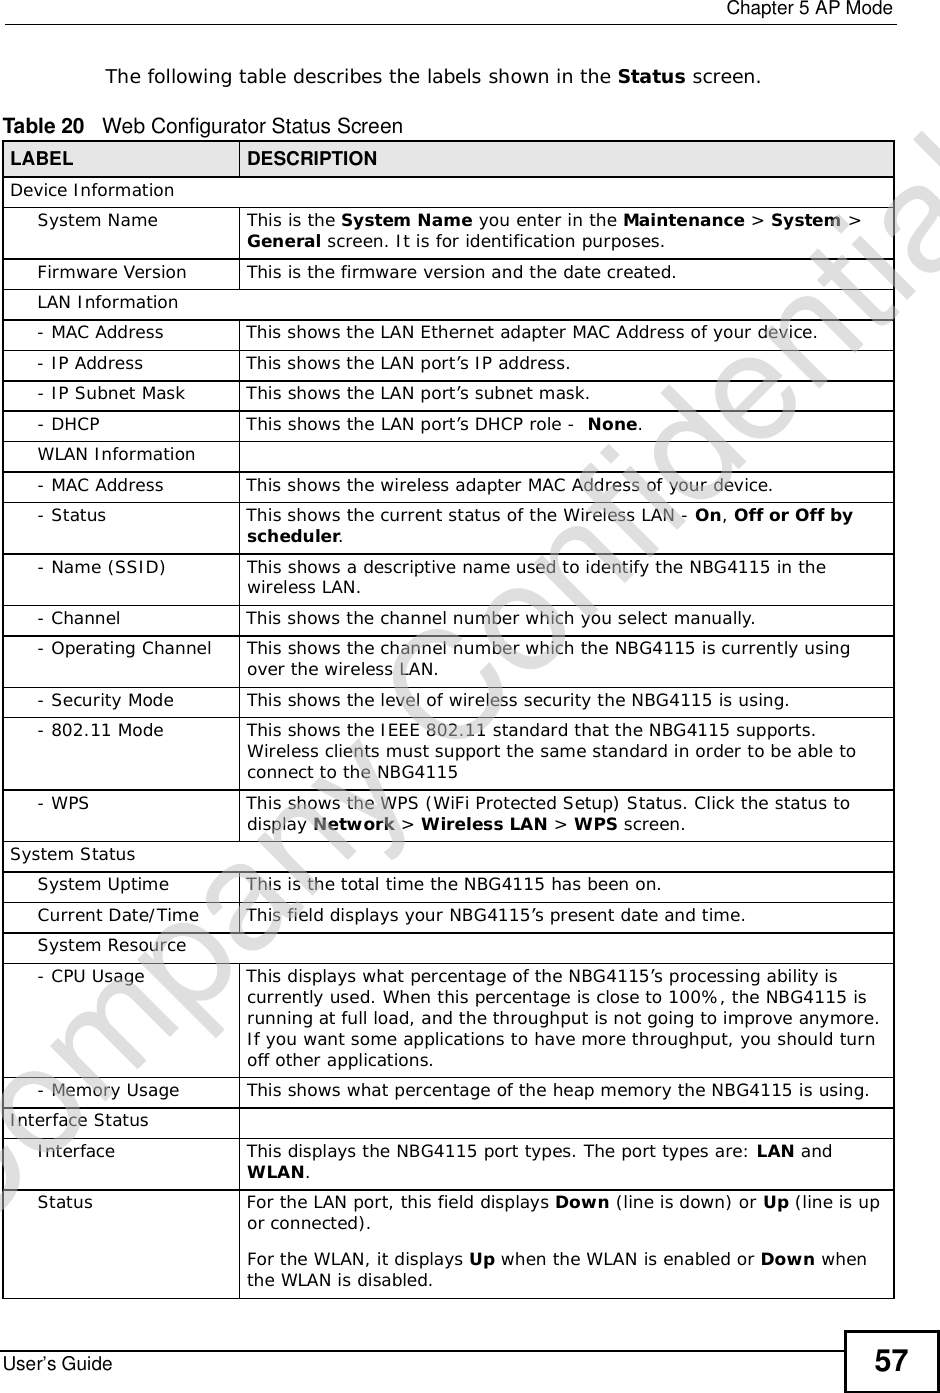  Chapter 5AP ModeUser’s Guide 57The following table describes the labels shown in the Status screen.Table 20   Web Configurator Status ScreenLABEL DESCRIPTIONDevice InformationSystem NameThis is the System Name you enter in the Maintenance &gt; System &gt;General screen. It is for identification purposes.Firmware VersionThis is the firmware version and the date created. LAN Information- MAC AddressThis shows the LAN Ethernet adapter MAC Address of your device.- IP AddressThis shows the LAN port’s IP address.- IP Subnet MaskThis shows the LAN port’s subnet mask.- DHCPThis shows the LAN port’s DHCP role -  None.WLAN Information- MAC AddressThis shows the wireless adapter MAC Address of your device.- StatusThis shows the current status of the Wireless LAN - On,Off or Off by scheduler.- Name (SSID)This shows a descriptive name used to identify the NBG4115 in the wireless LAN. - ChannelThis shows the channel number which you select manually.- Operating ChannelThis shows the channel number which the NBG4115 is currently using over the wireless LAN. - Security ModeThis shows the level of wireless security the NBG4115 is using.- 802.11 ModeThis shows the IEEE 802.11 standard that the NBG4115 supports. Wireless clients must support the same standard in order to be able to connect to the NBG4115- WPSThis shows the WPS (WiFi Protected Setup) Status. Click the status to display Network &gt; Wireless LAN &gt; WPS screen.System StatusSystem UptimeThis is the total time the NBG4115 has been on.Current Date/TimeThis field displays your NBG4115’s present date and time.System Resource- CPU UsageThis displays what percentage of the NBG4115’s processing ability is currently used. When this percentage is close to 100%, the NBG4115 is running at full load, and the throughput is not going to improve anymore. If you want some applications to have more throughput, you should turn off other applications.- Memory UsageThis shows what percentage of the heap memory the NBG4115 is using. Interface StatusInterfaceThis displays the NBG4115 port types. The port types are: LAN and WLAN.StatusFor the LAN port, this field displays Down (line is down) or Up (line is up or connected).For the WLAN, it displays Up when the WLAN is enabled or Down when the WLAN is disabled.Company Confidential